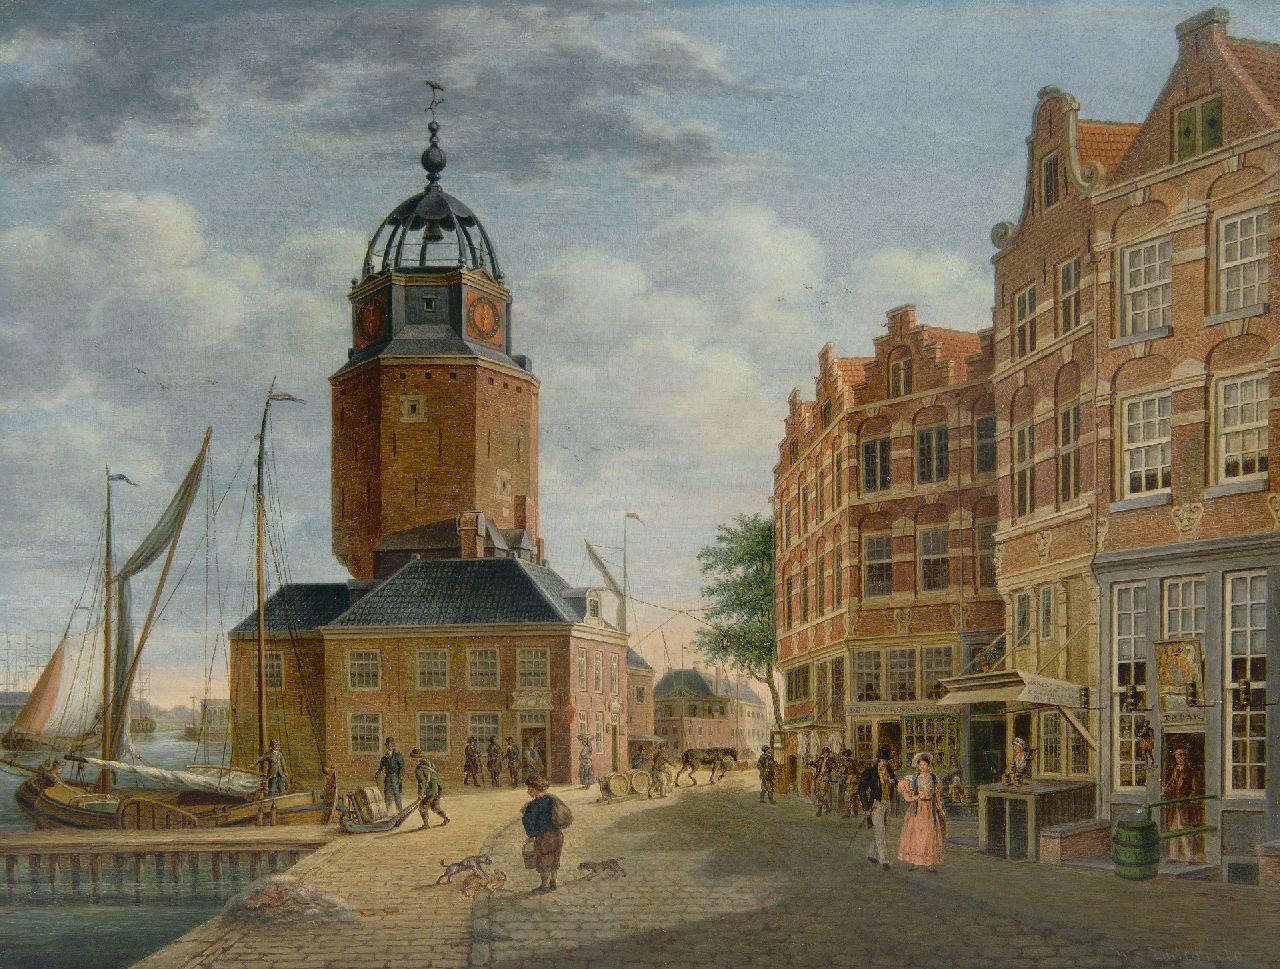 Zijderveld W.  | Willem Zijderveld | Paintings offered for sale | Townscape with quay and inner harbor, oil on panel 25.6 x 33.2 cm, signed l.r.